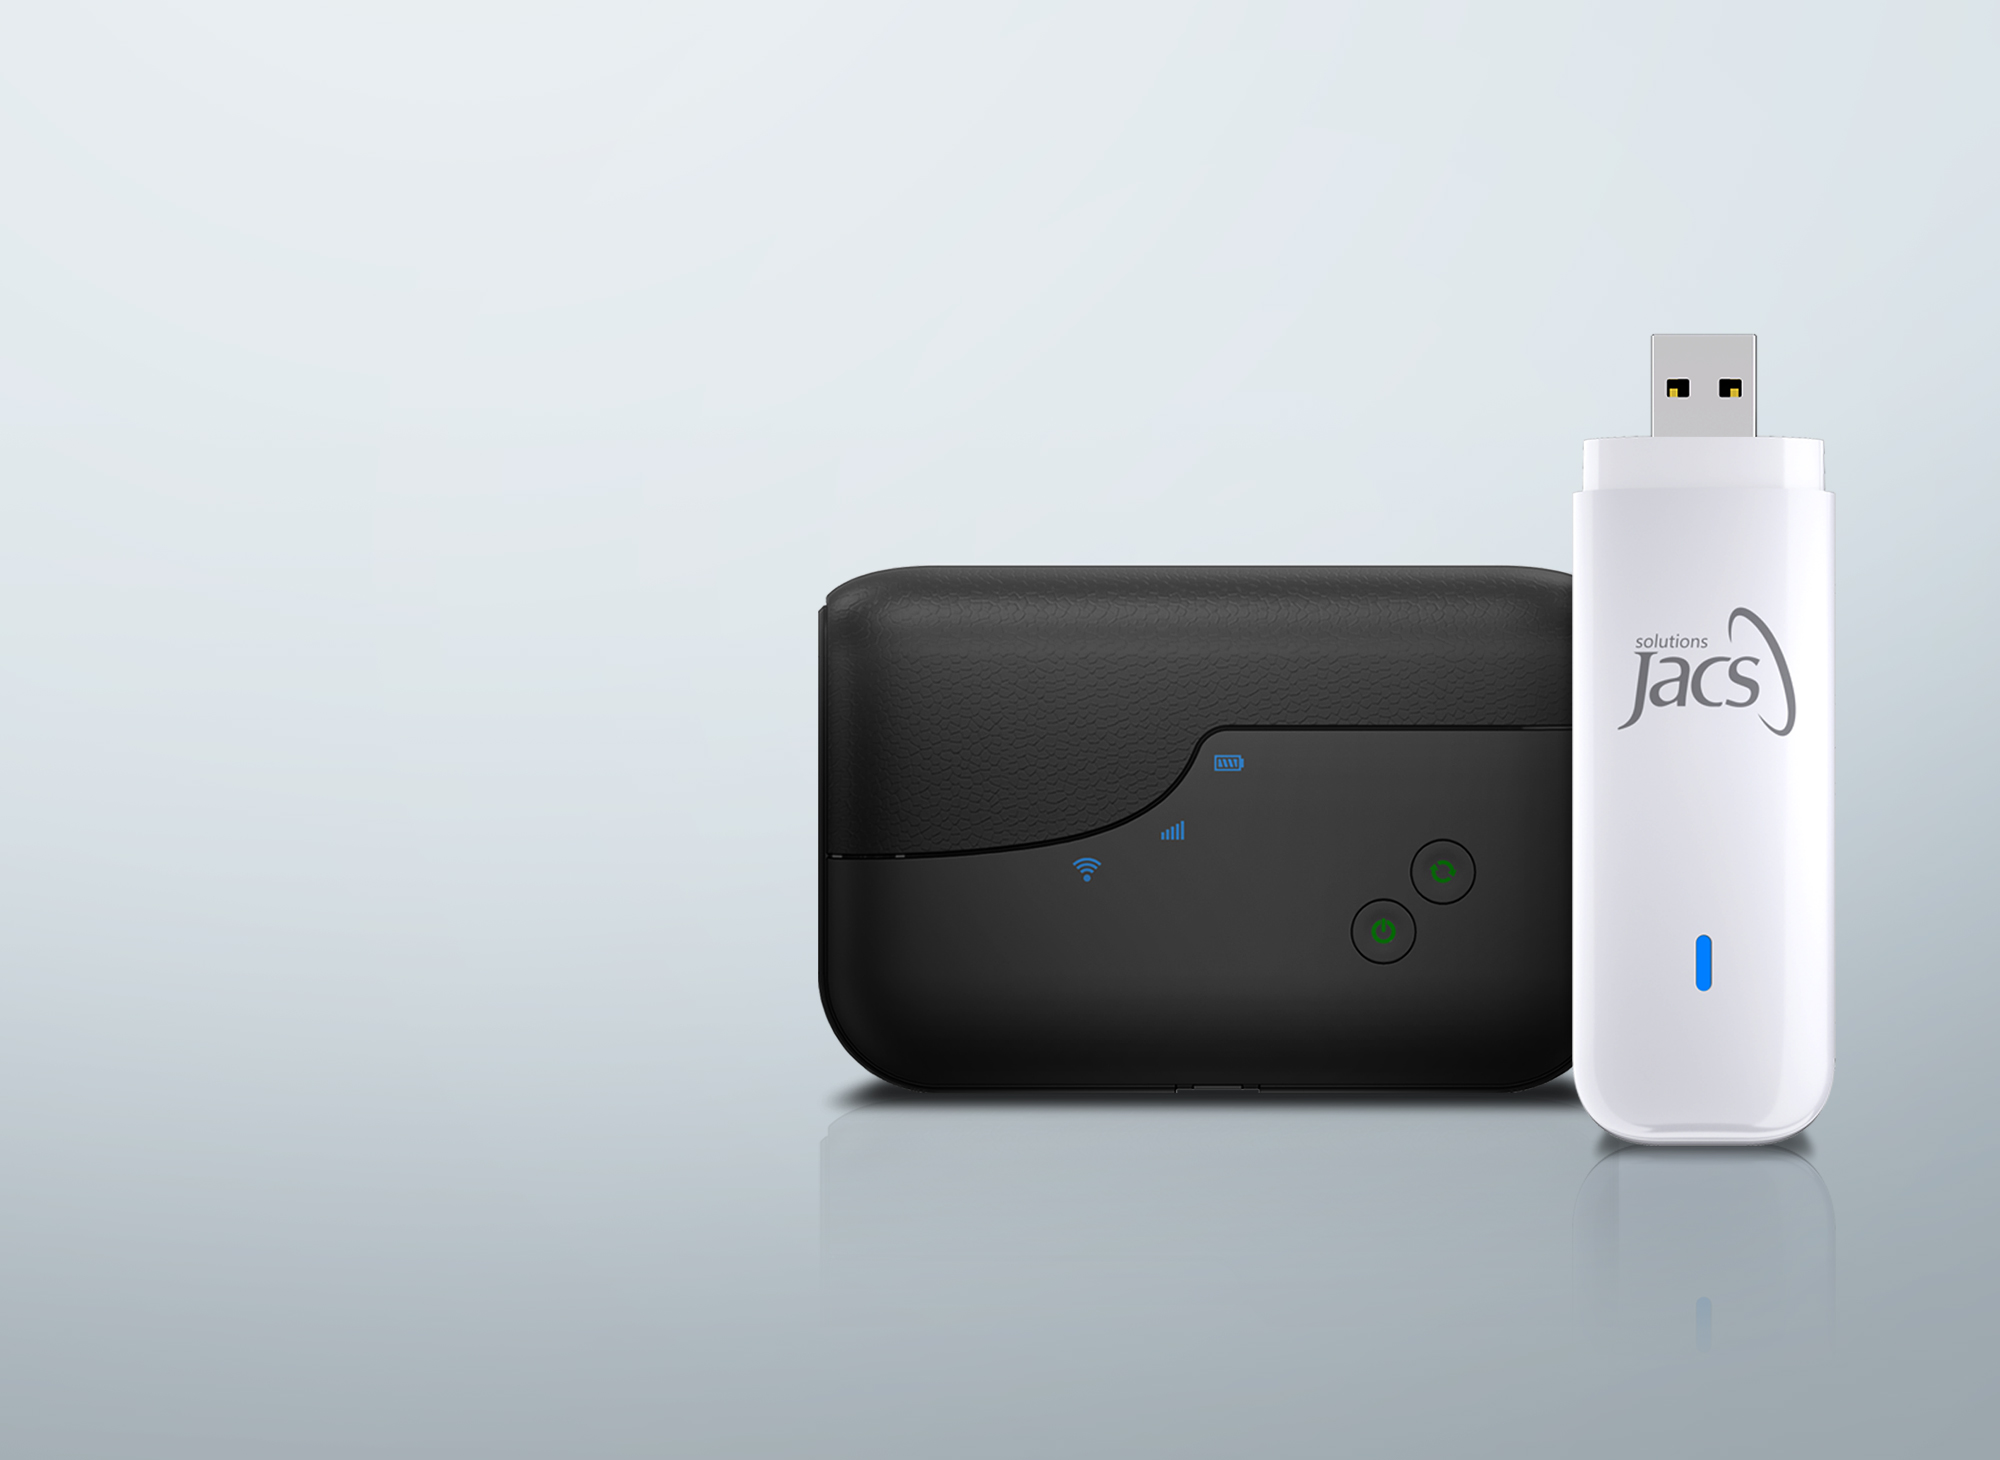 JACS Solutions MiFi cellular hotspot and dongle wireless devices